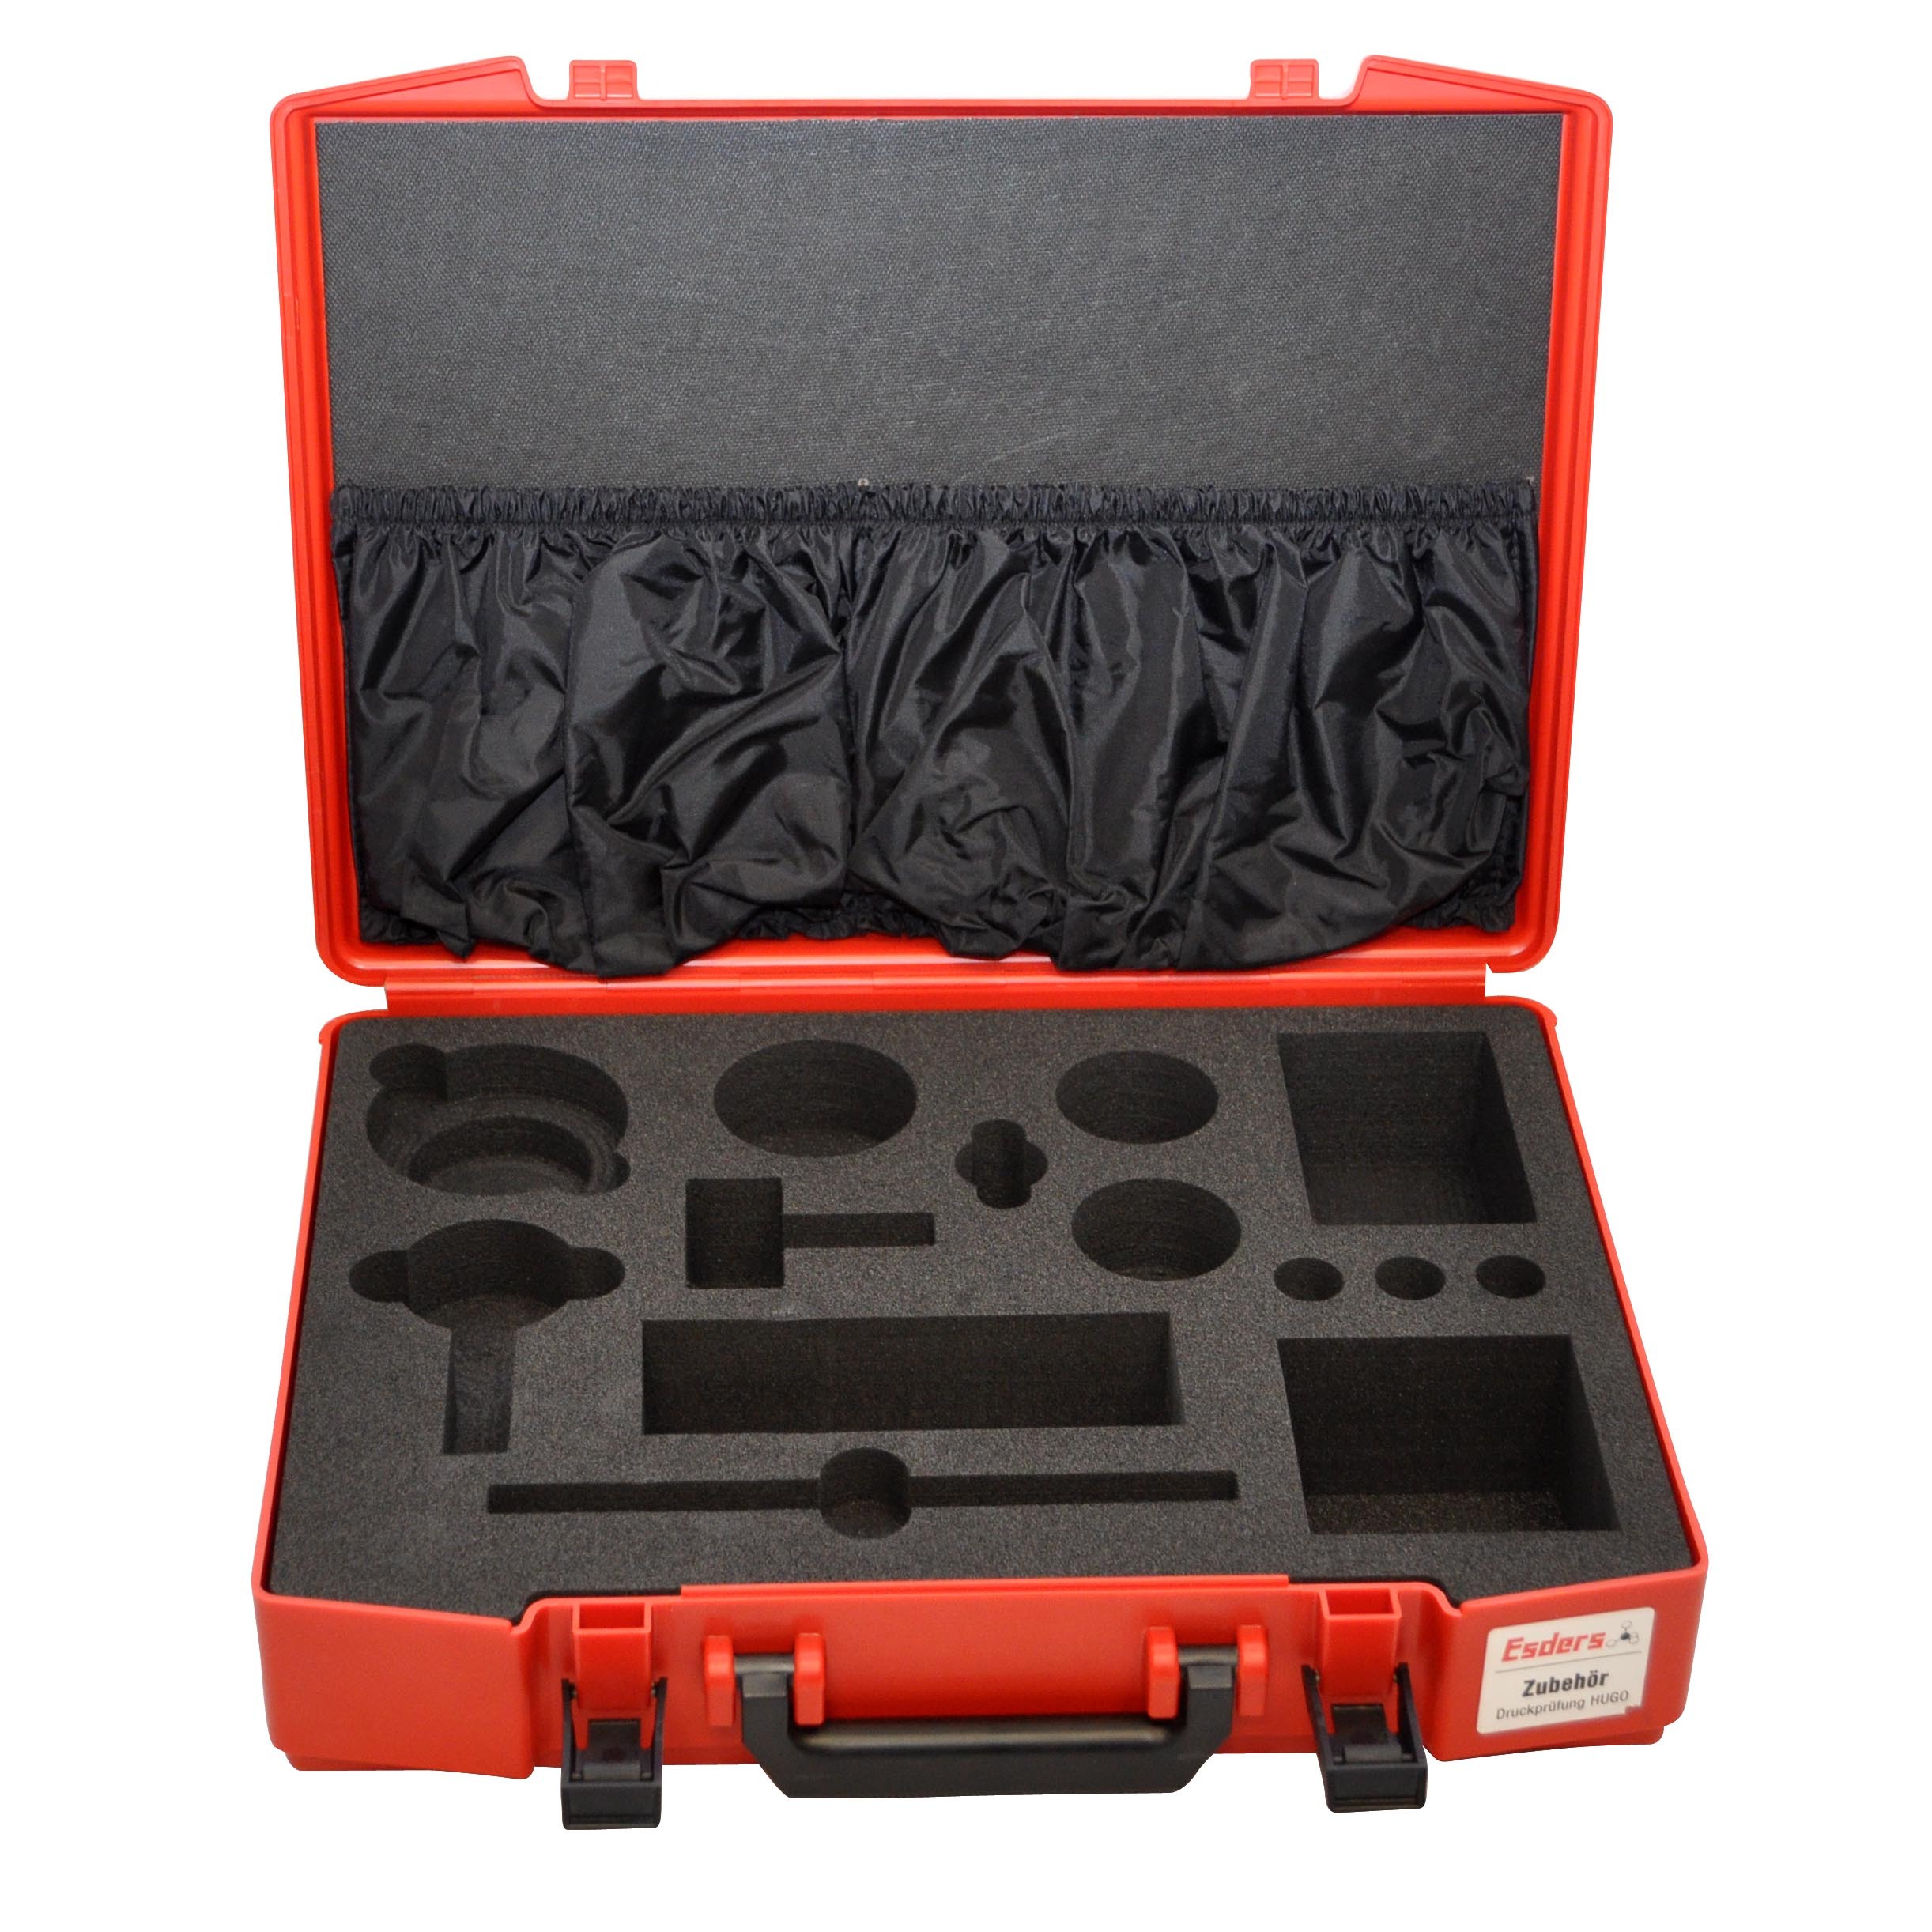 Carrying case with foam insert for HUGO